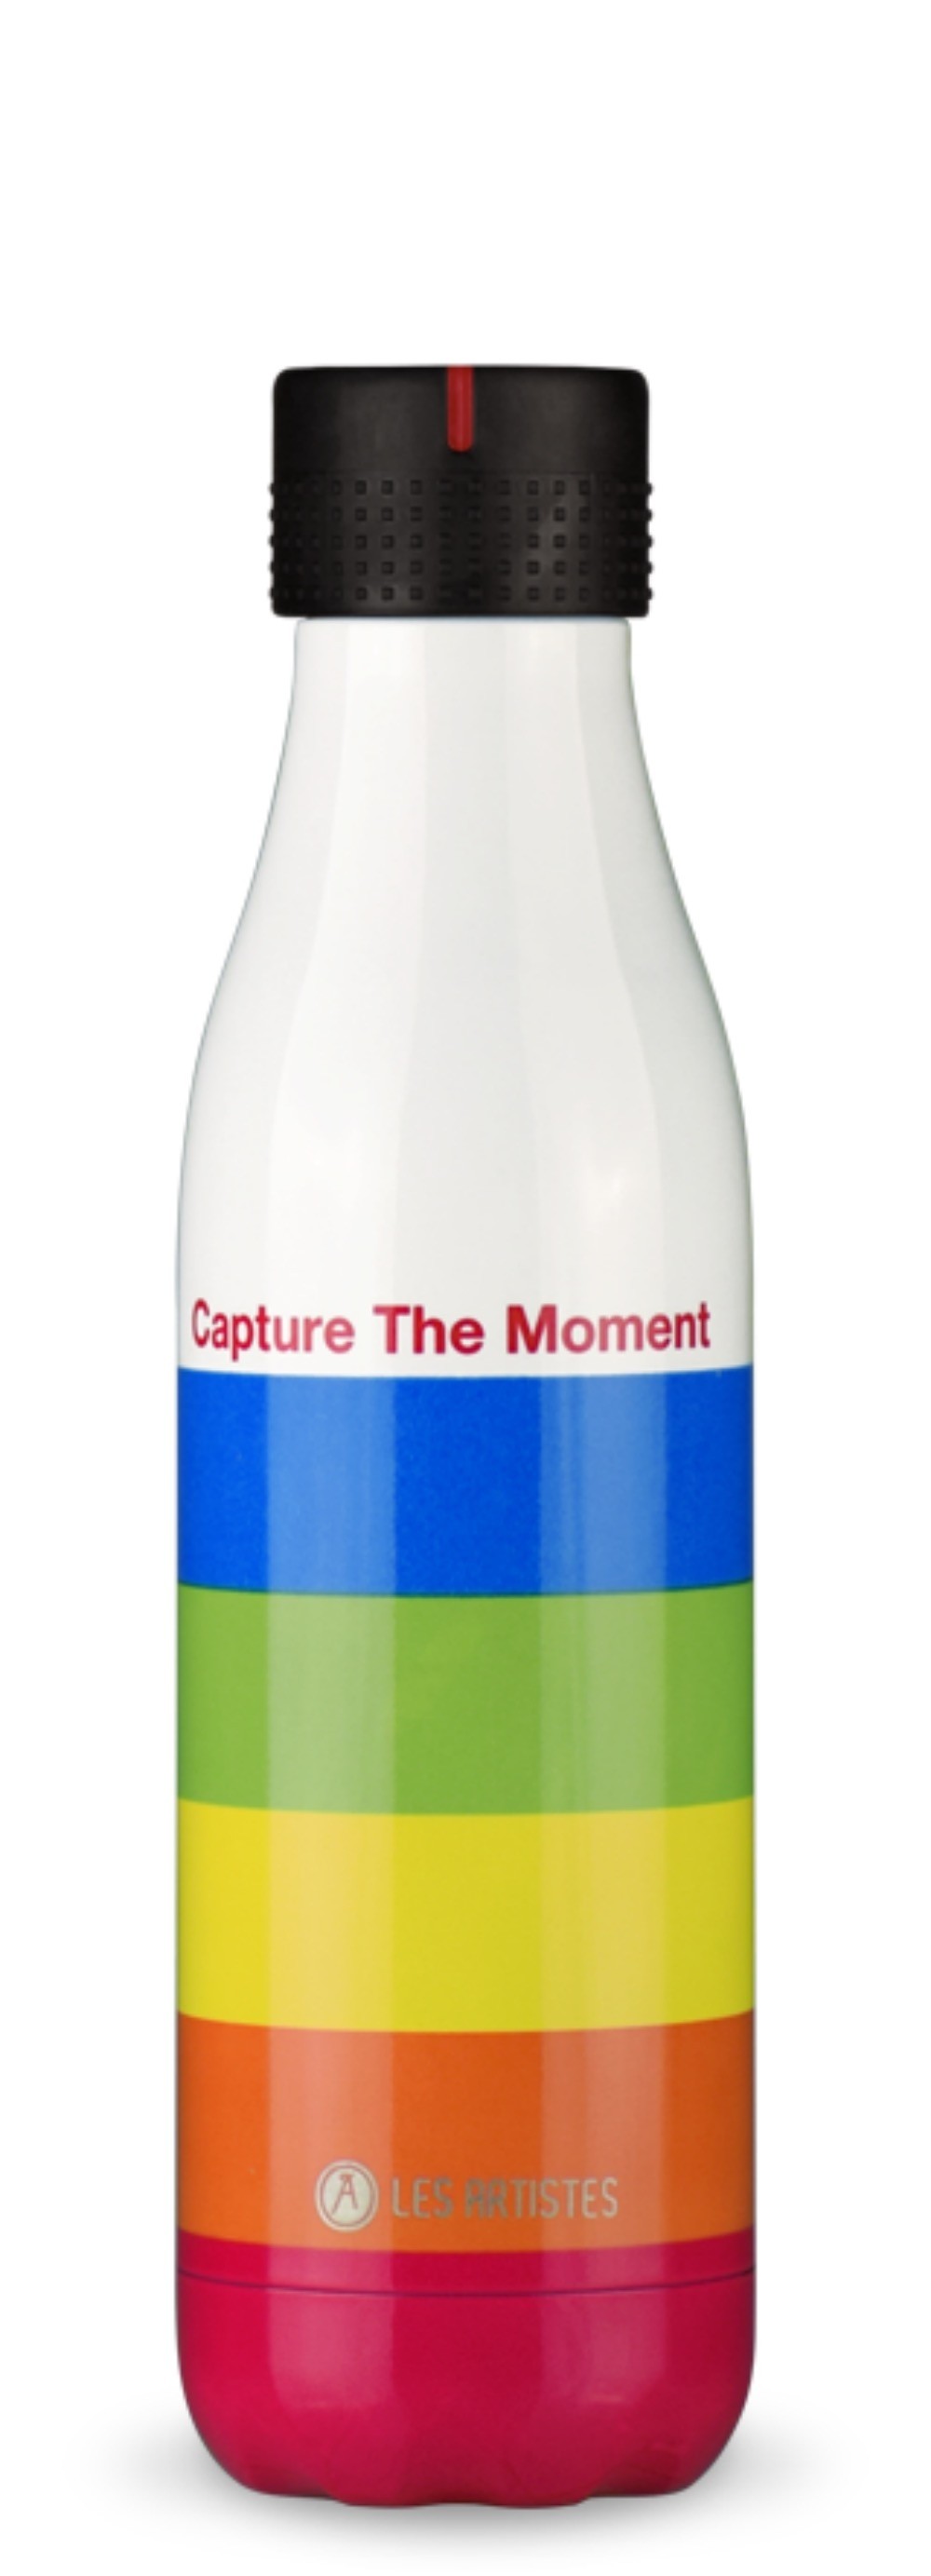 Les Artistes Paris Bottle UP Time UP Isoliertrinkflasche 500ml camera